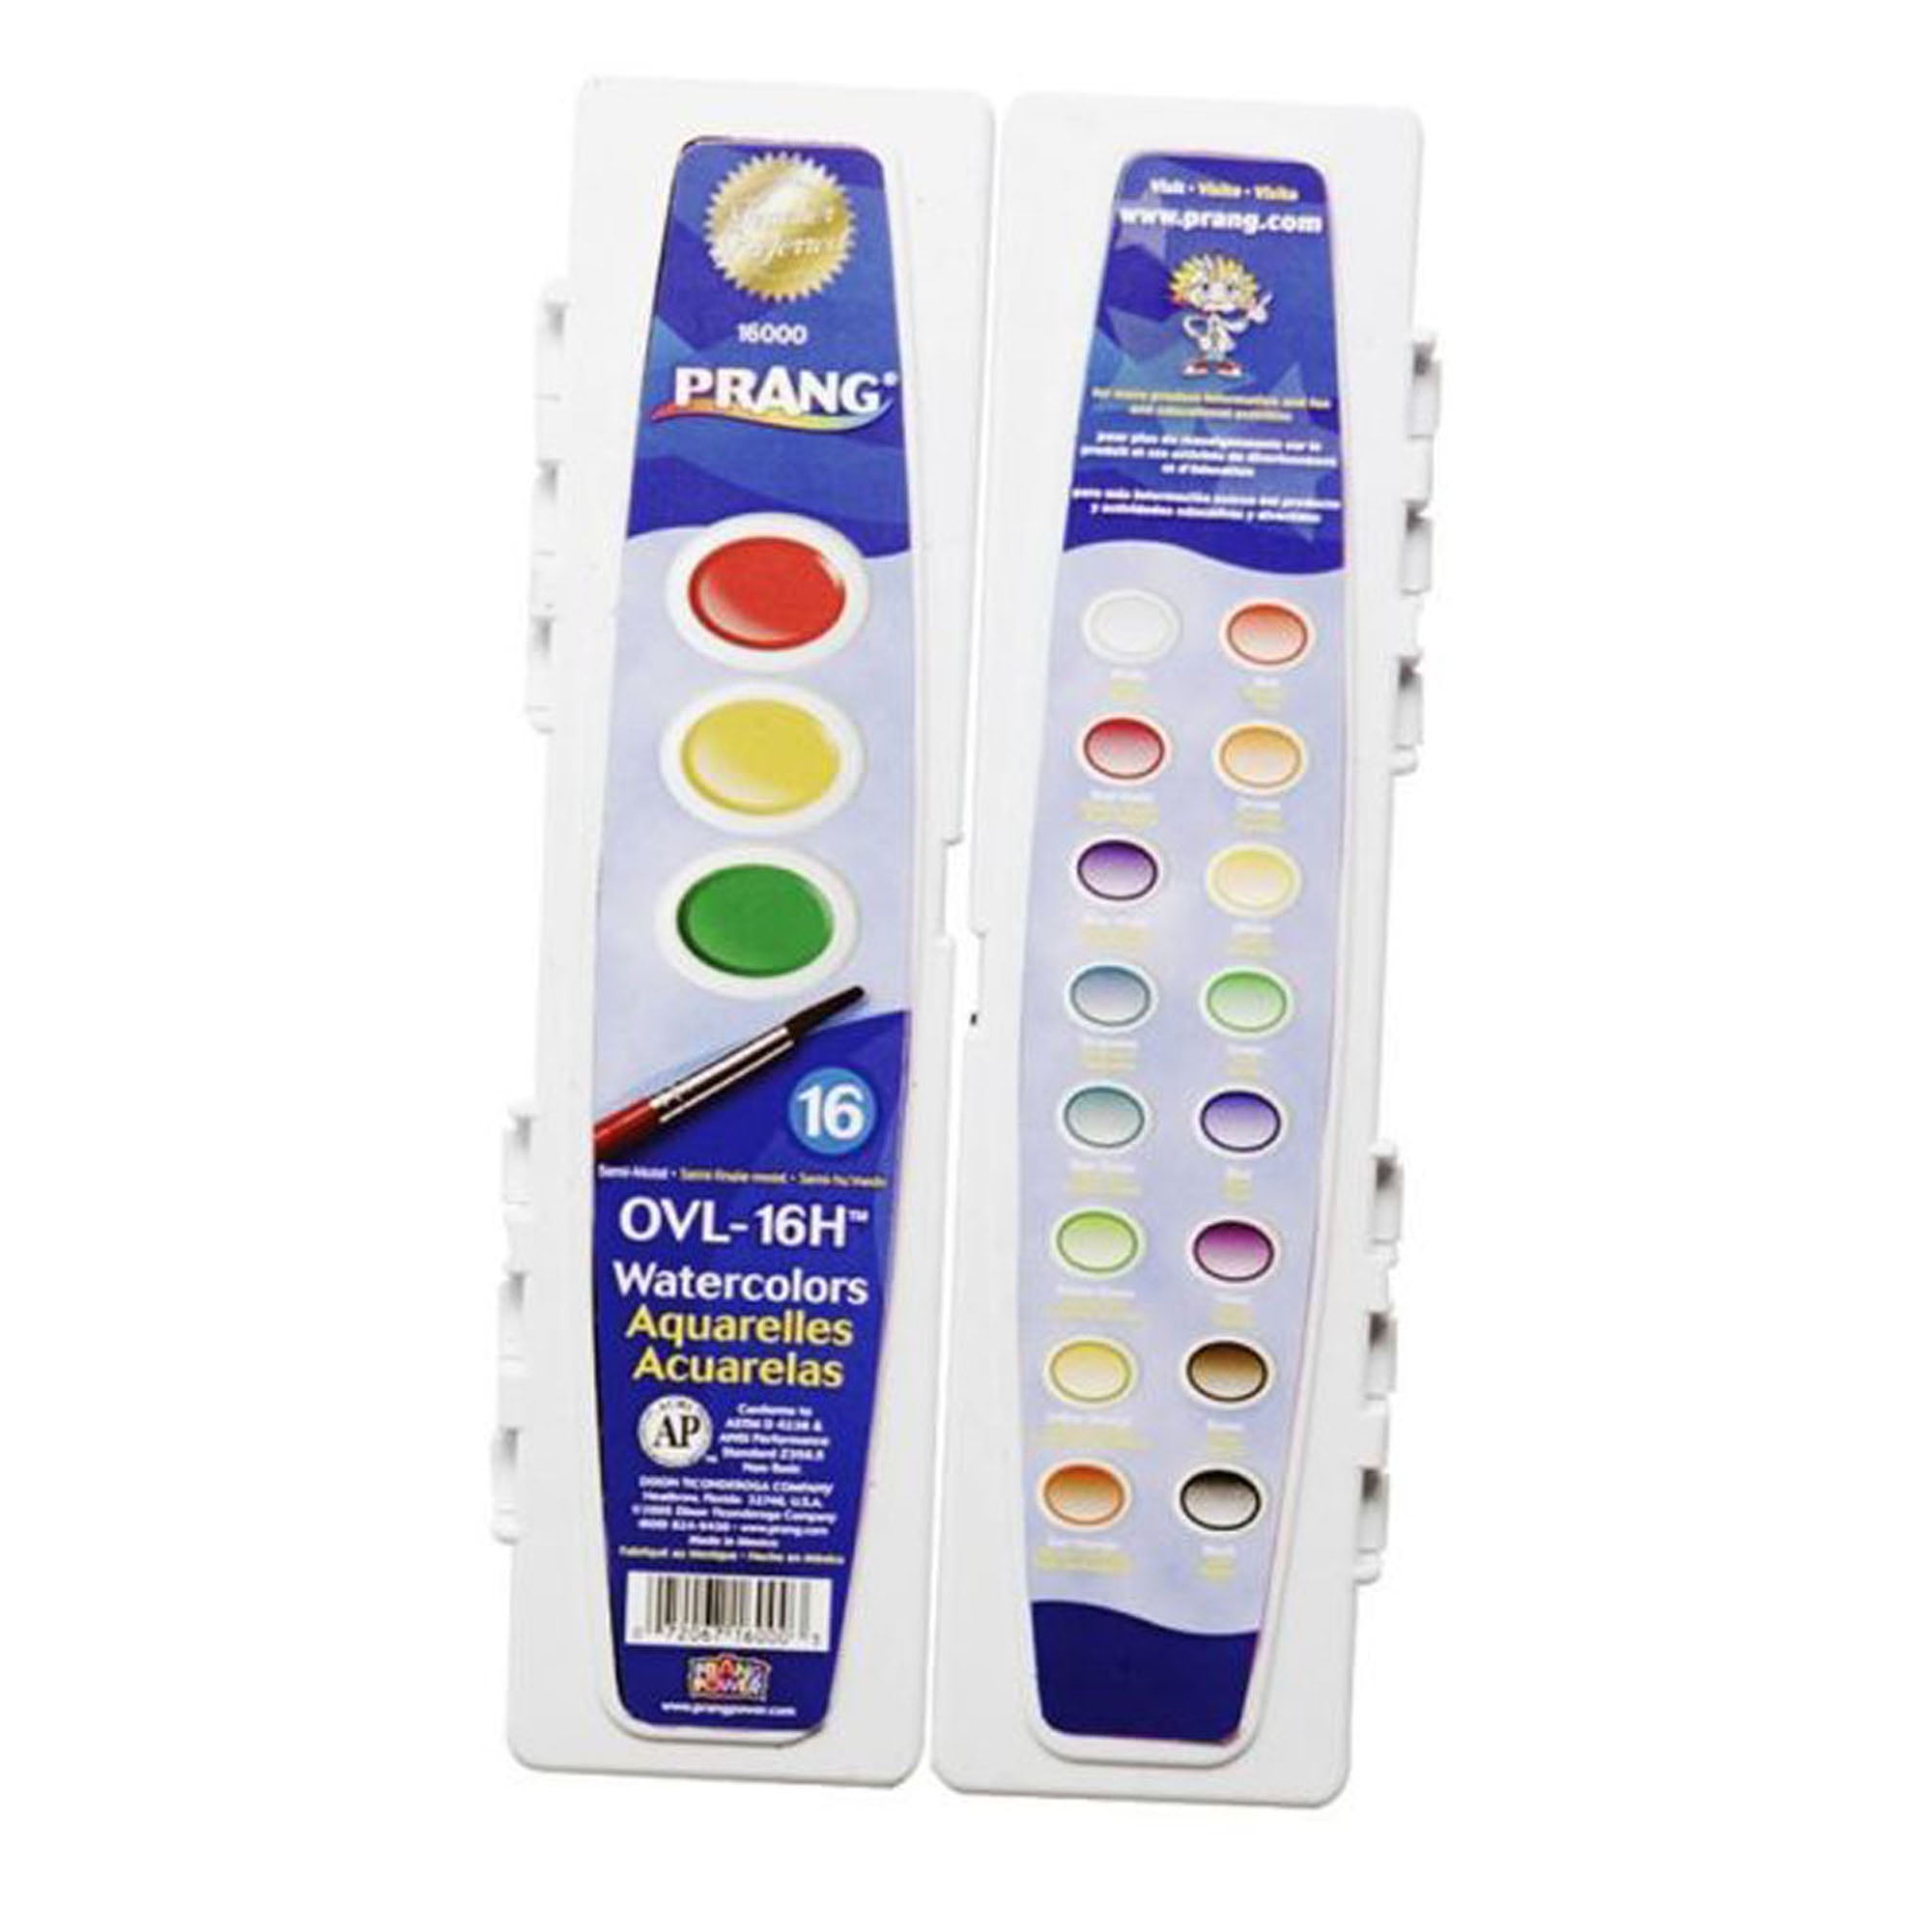 TBC The Best Crafts 16 Colors Watercolor Paint Set with 3 Bonus Brushes Non-Toxic for Student & Kids